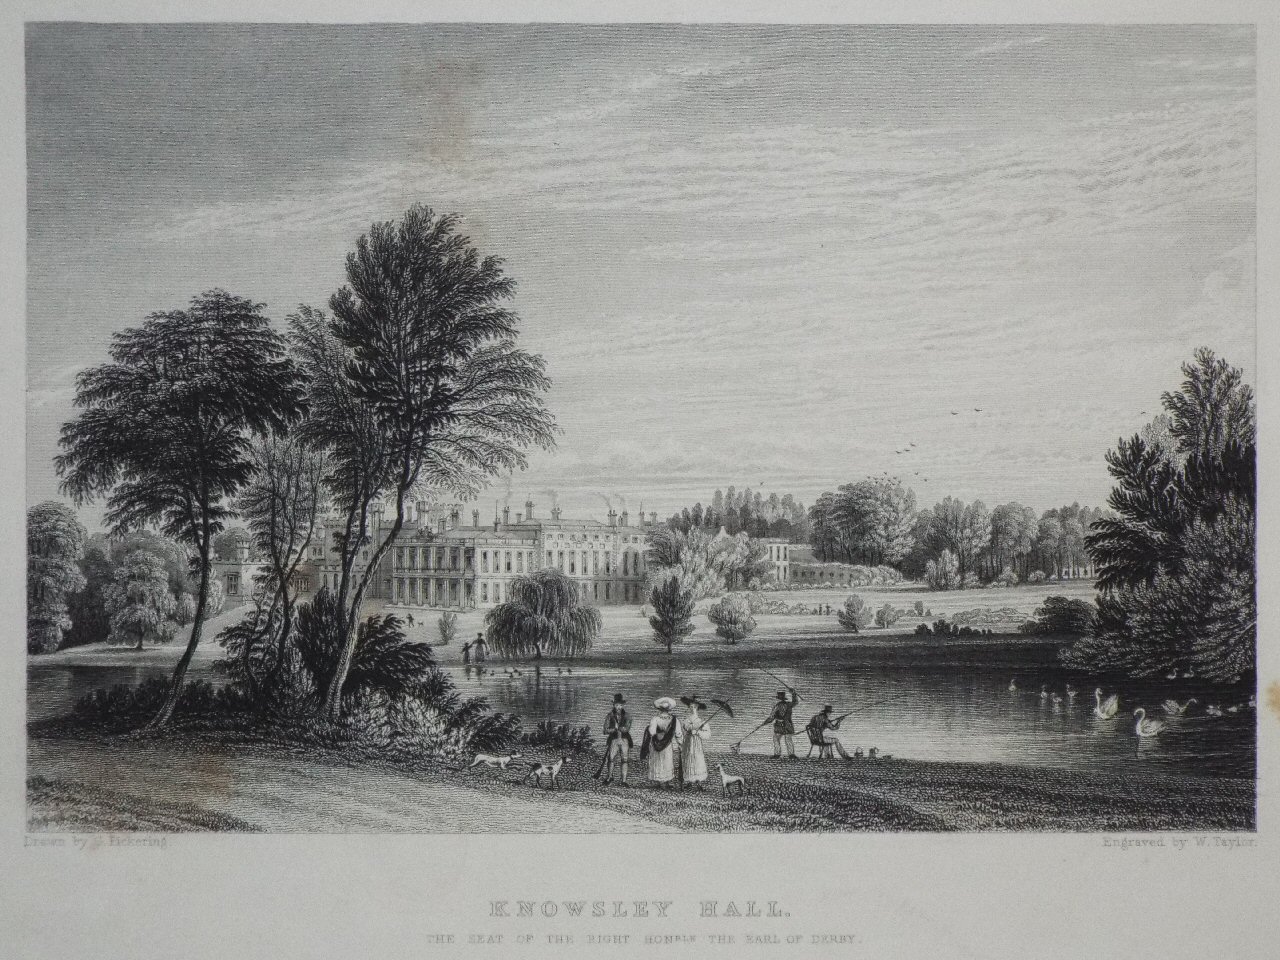 Print - Knowsley Hall, the Seat of the Right Honble. The Earl of Derby. - Taylor